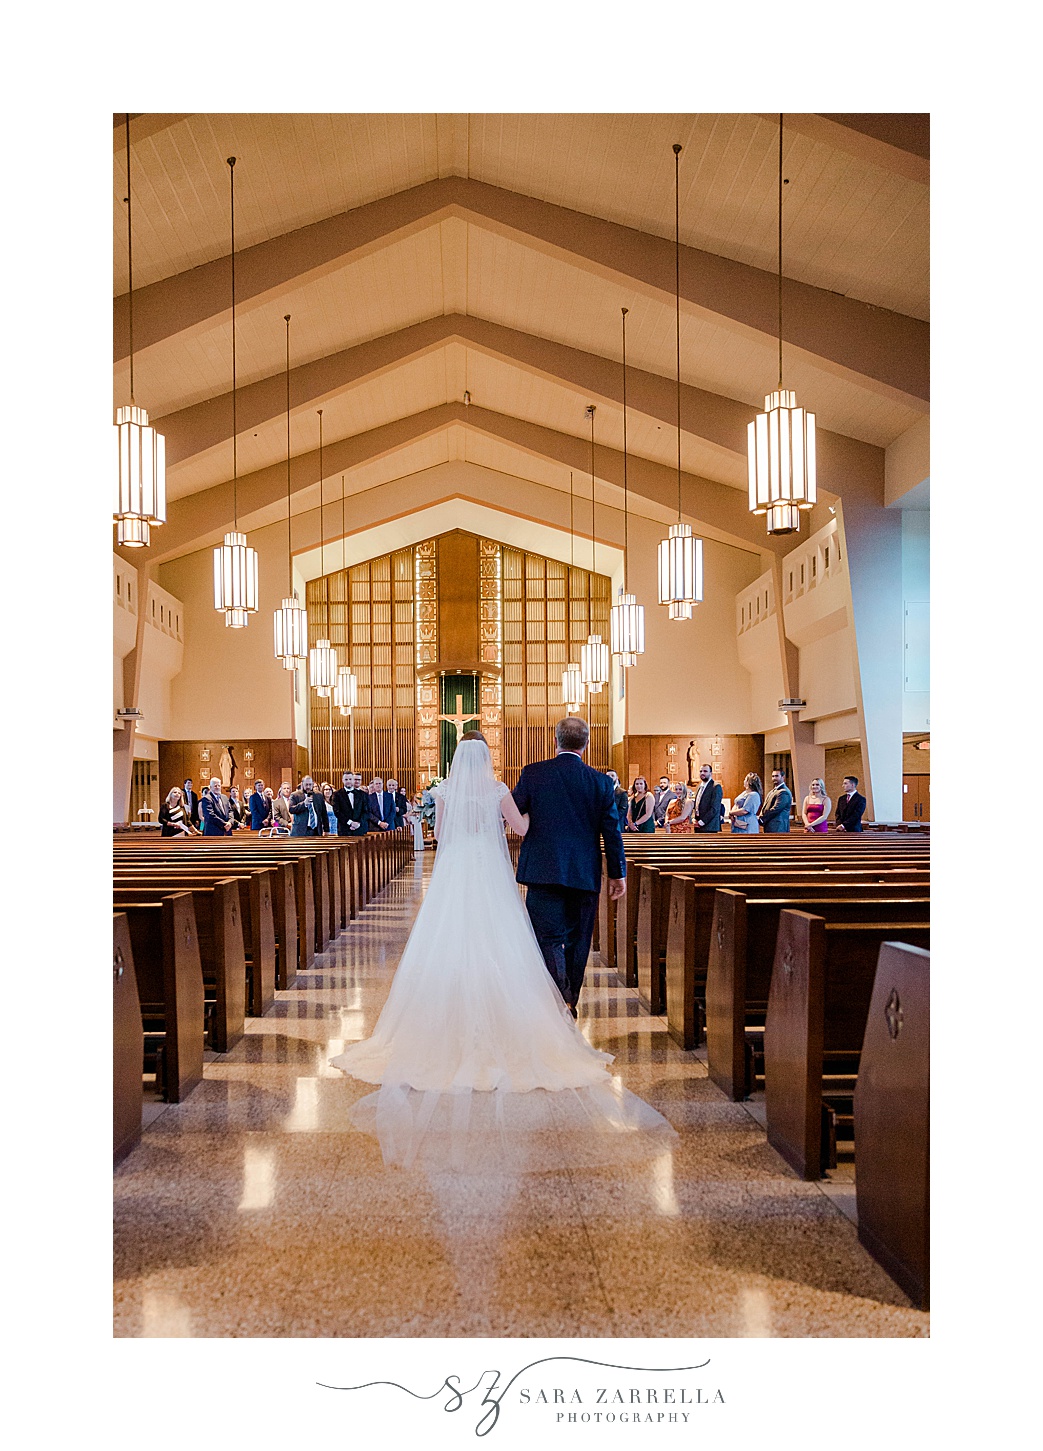 bride and father walk down aisle during traditional wedding ceremony in Rhode Island